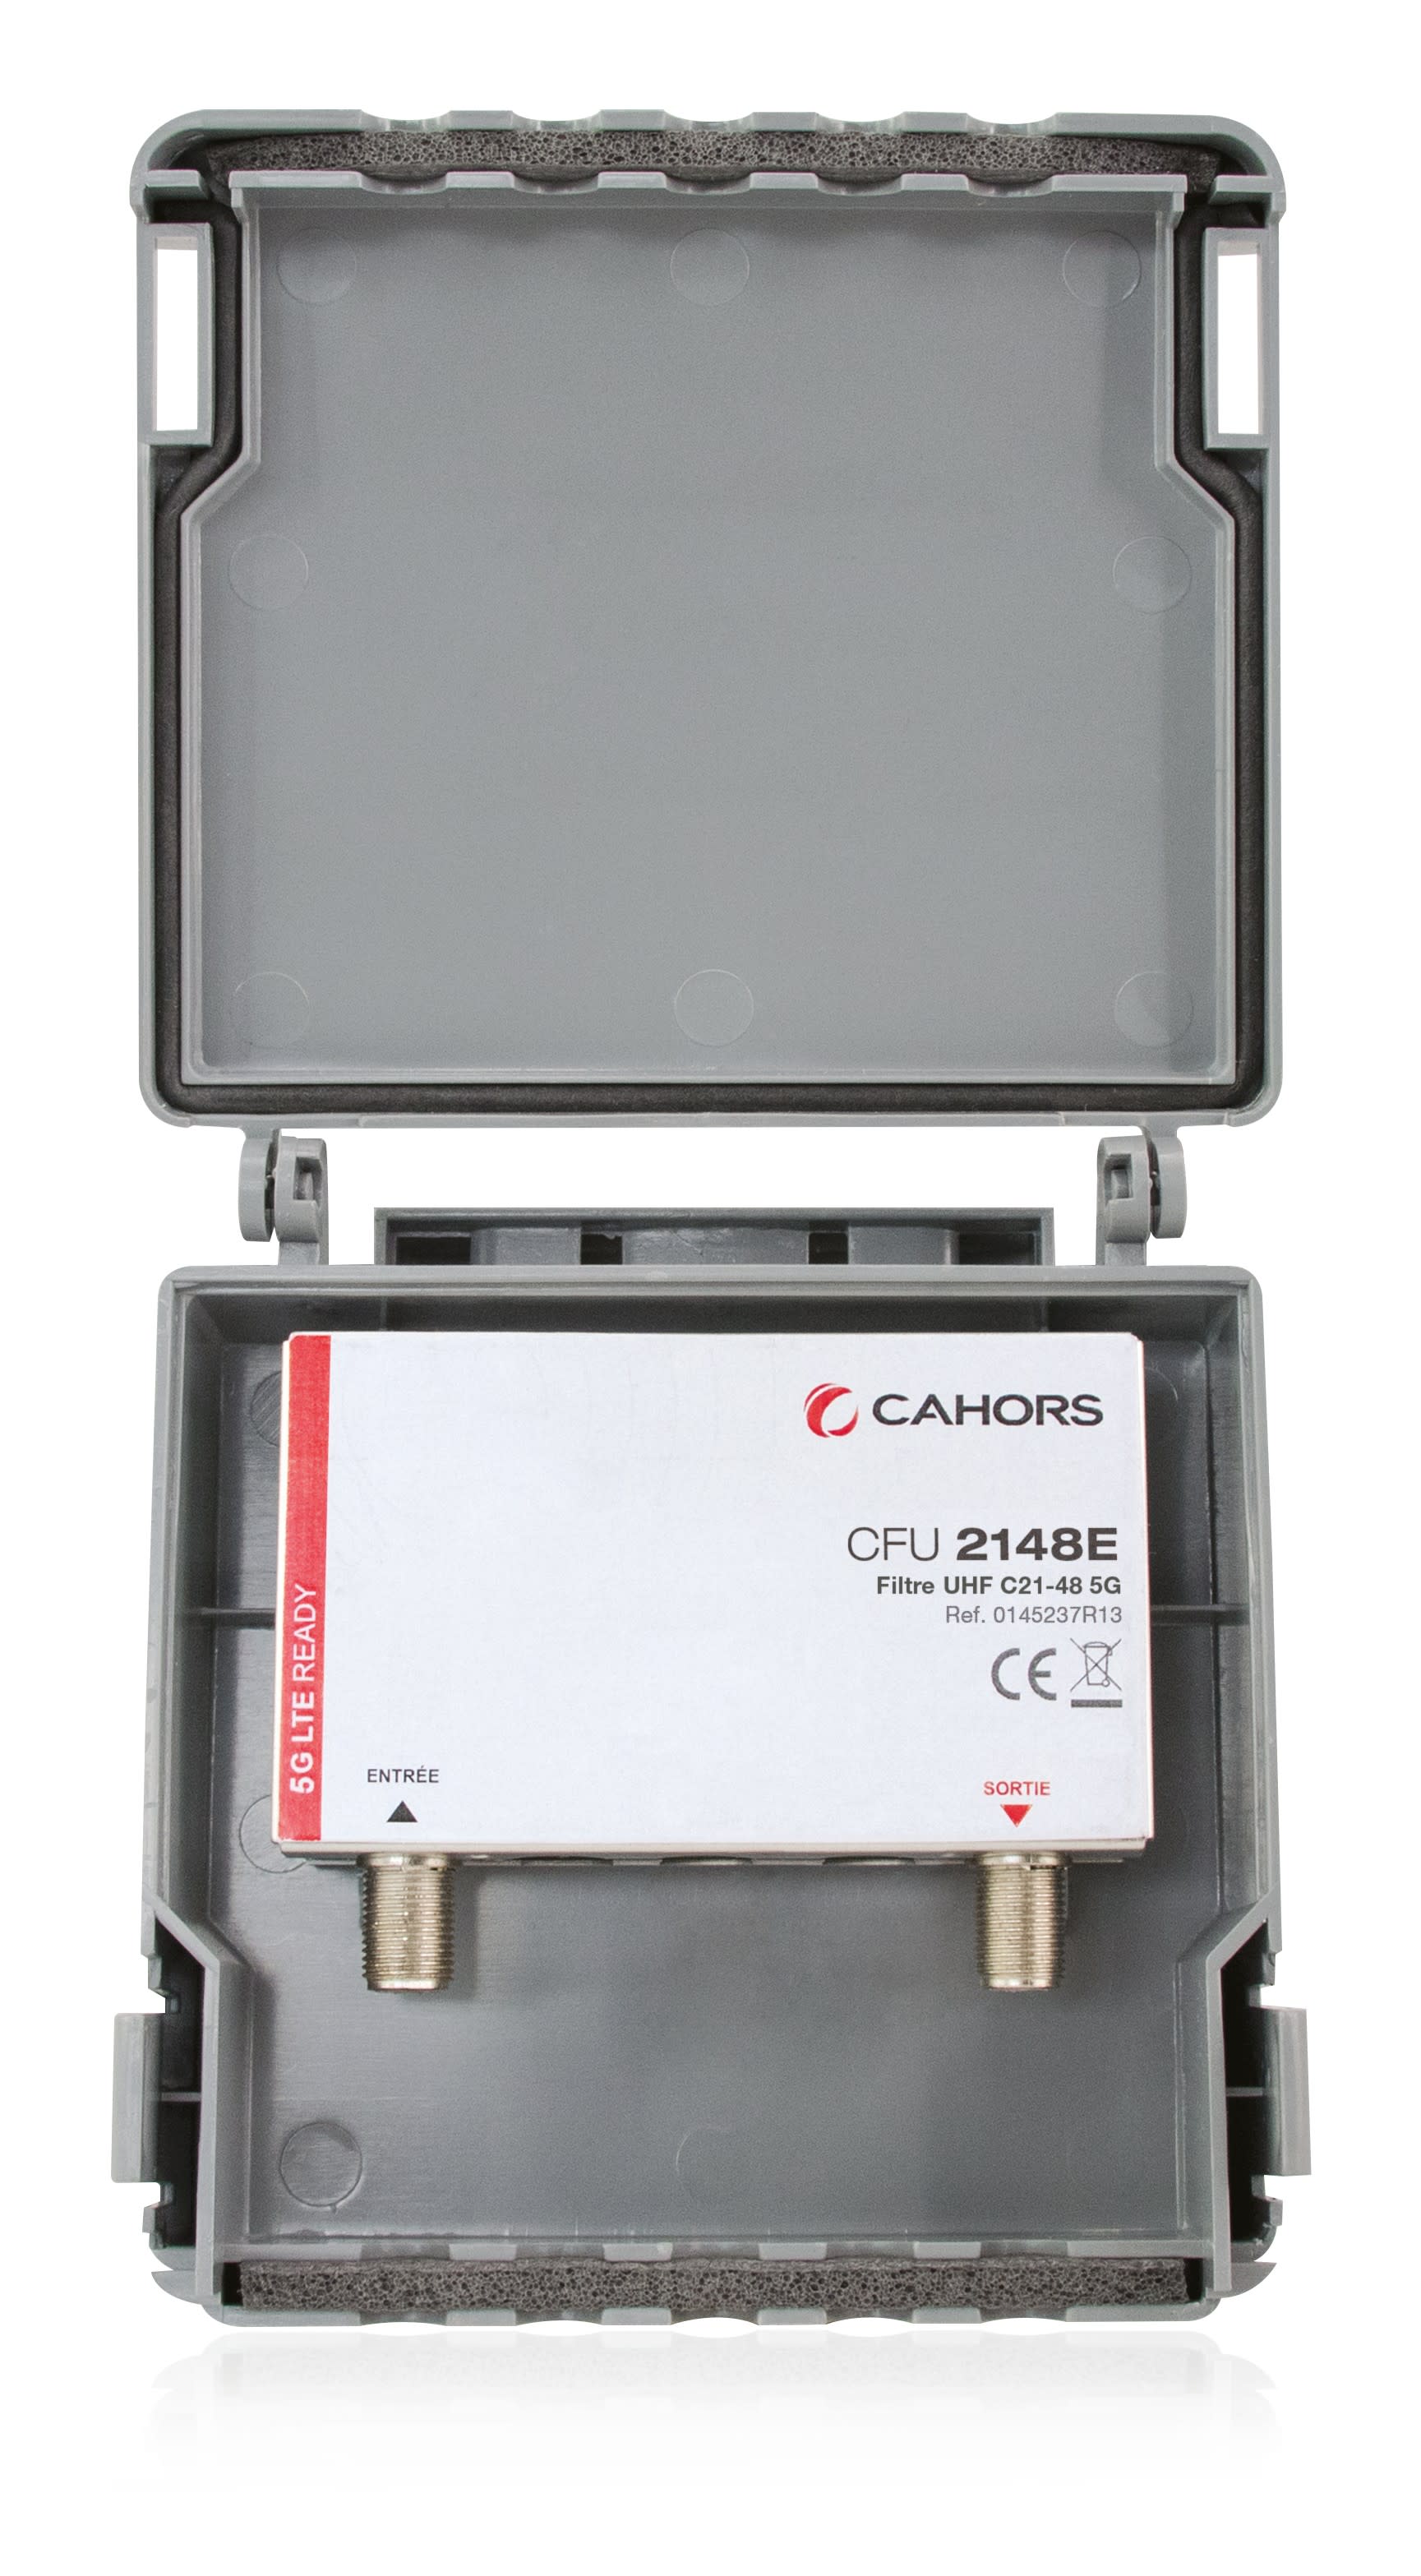 Cahors - Filtre Uhf Canaux 21 a 48 Exterieur Rejection Vhf + 5G